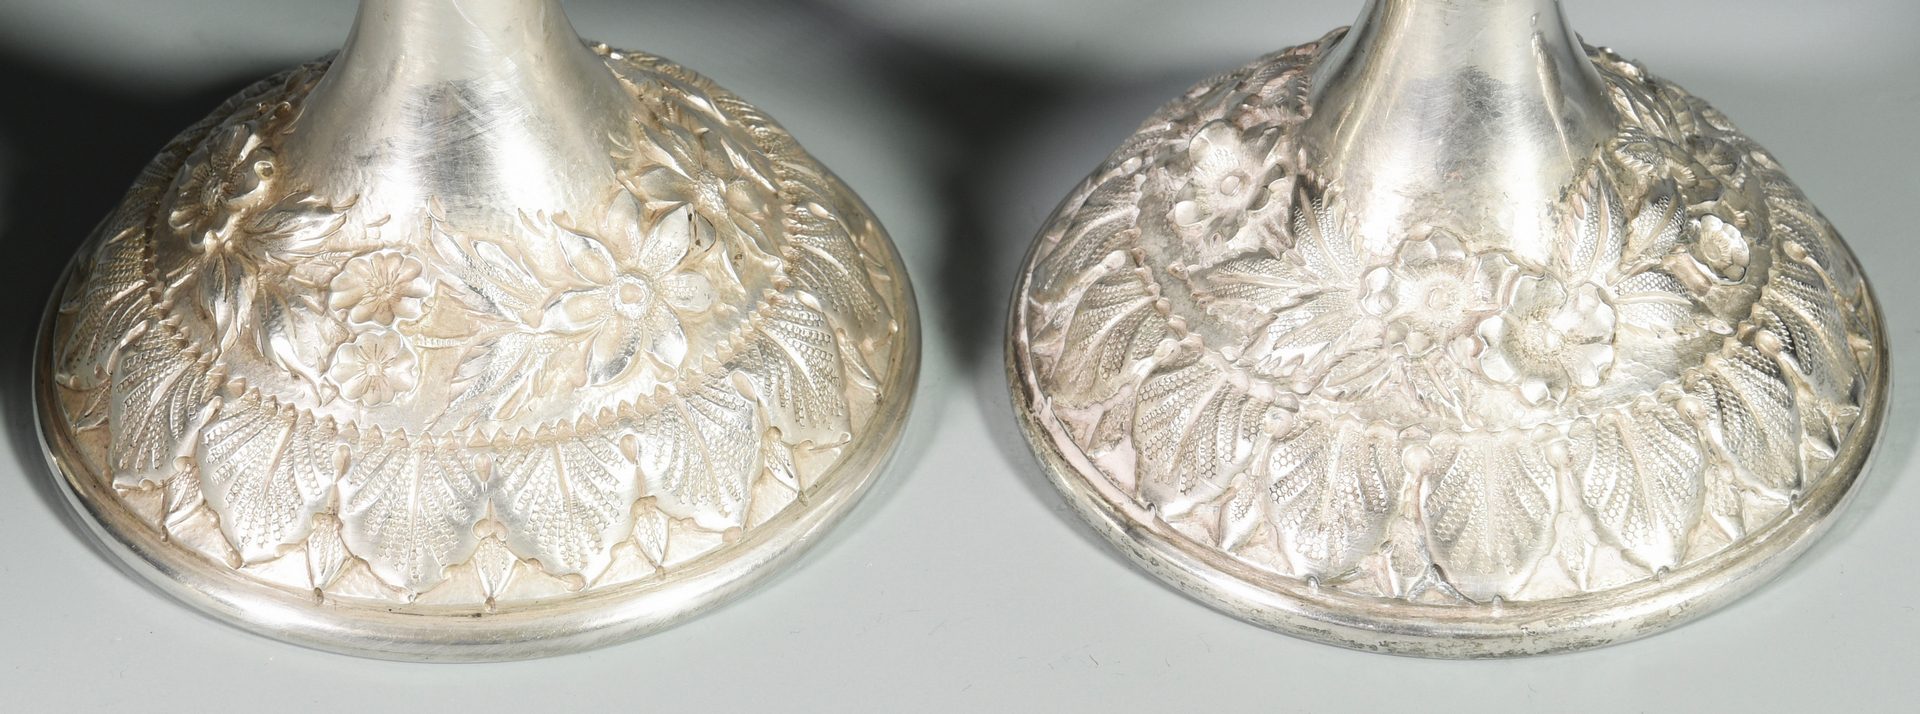 Lot 47: 12 Baltimore Sterling Silver Repousse Goblets